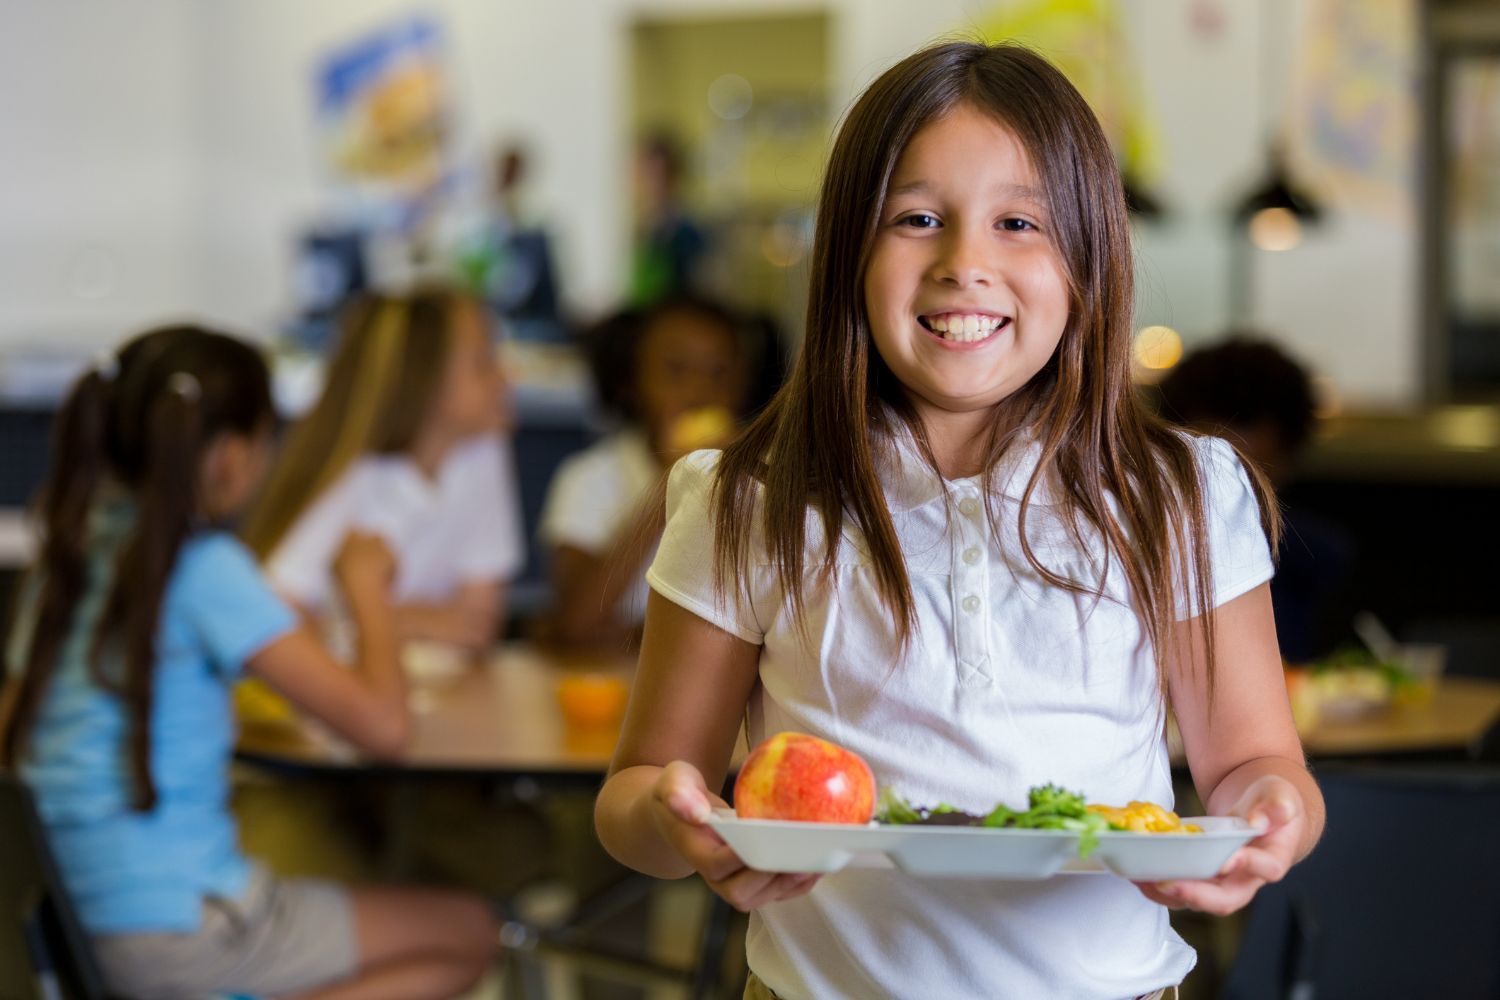 Smiling girl in school cafeteria holding lunch tray.